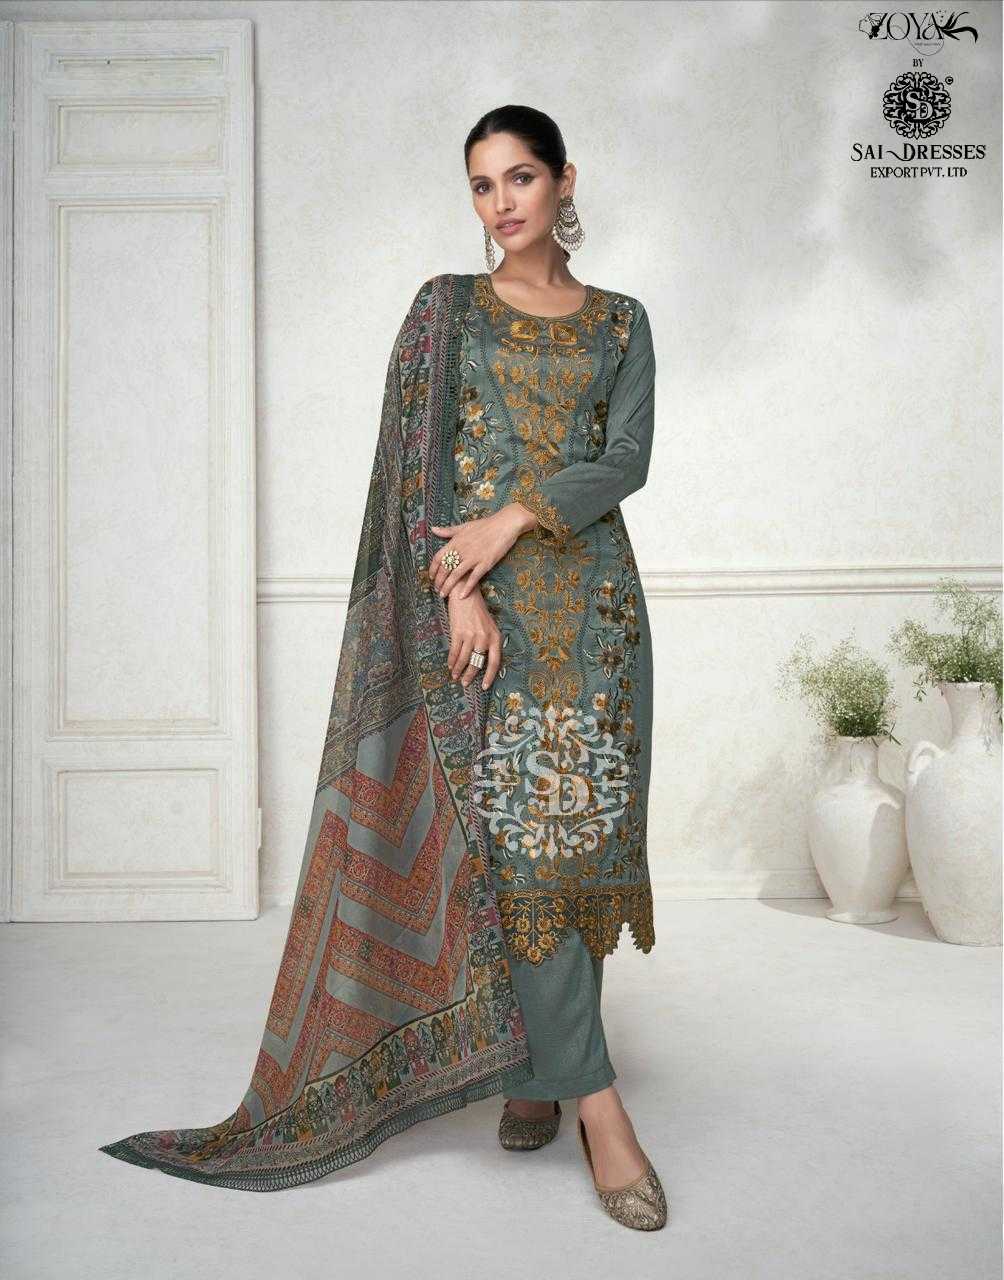  ARSH READY TO EXCLUSIVE WEAR PREMIUM SILK HEAVY DESIGNER 3 PIECE SUITS IN WHOLESALE RATE IN SURAT  